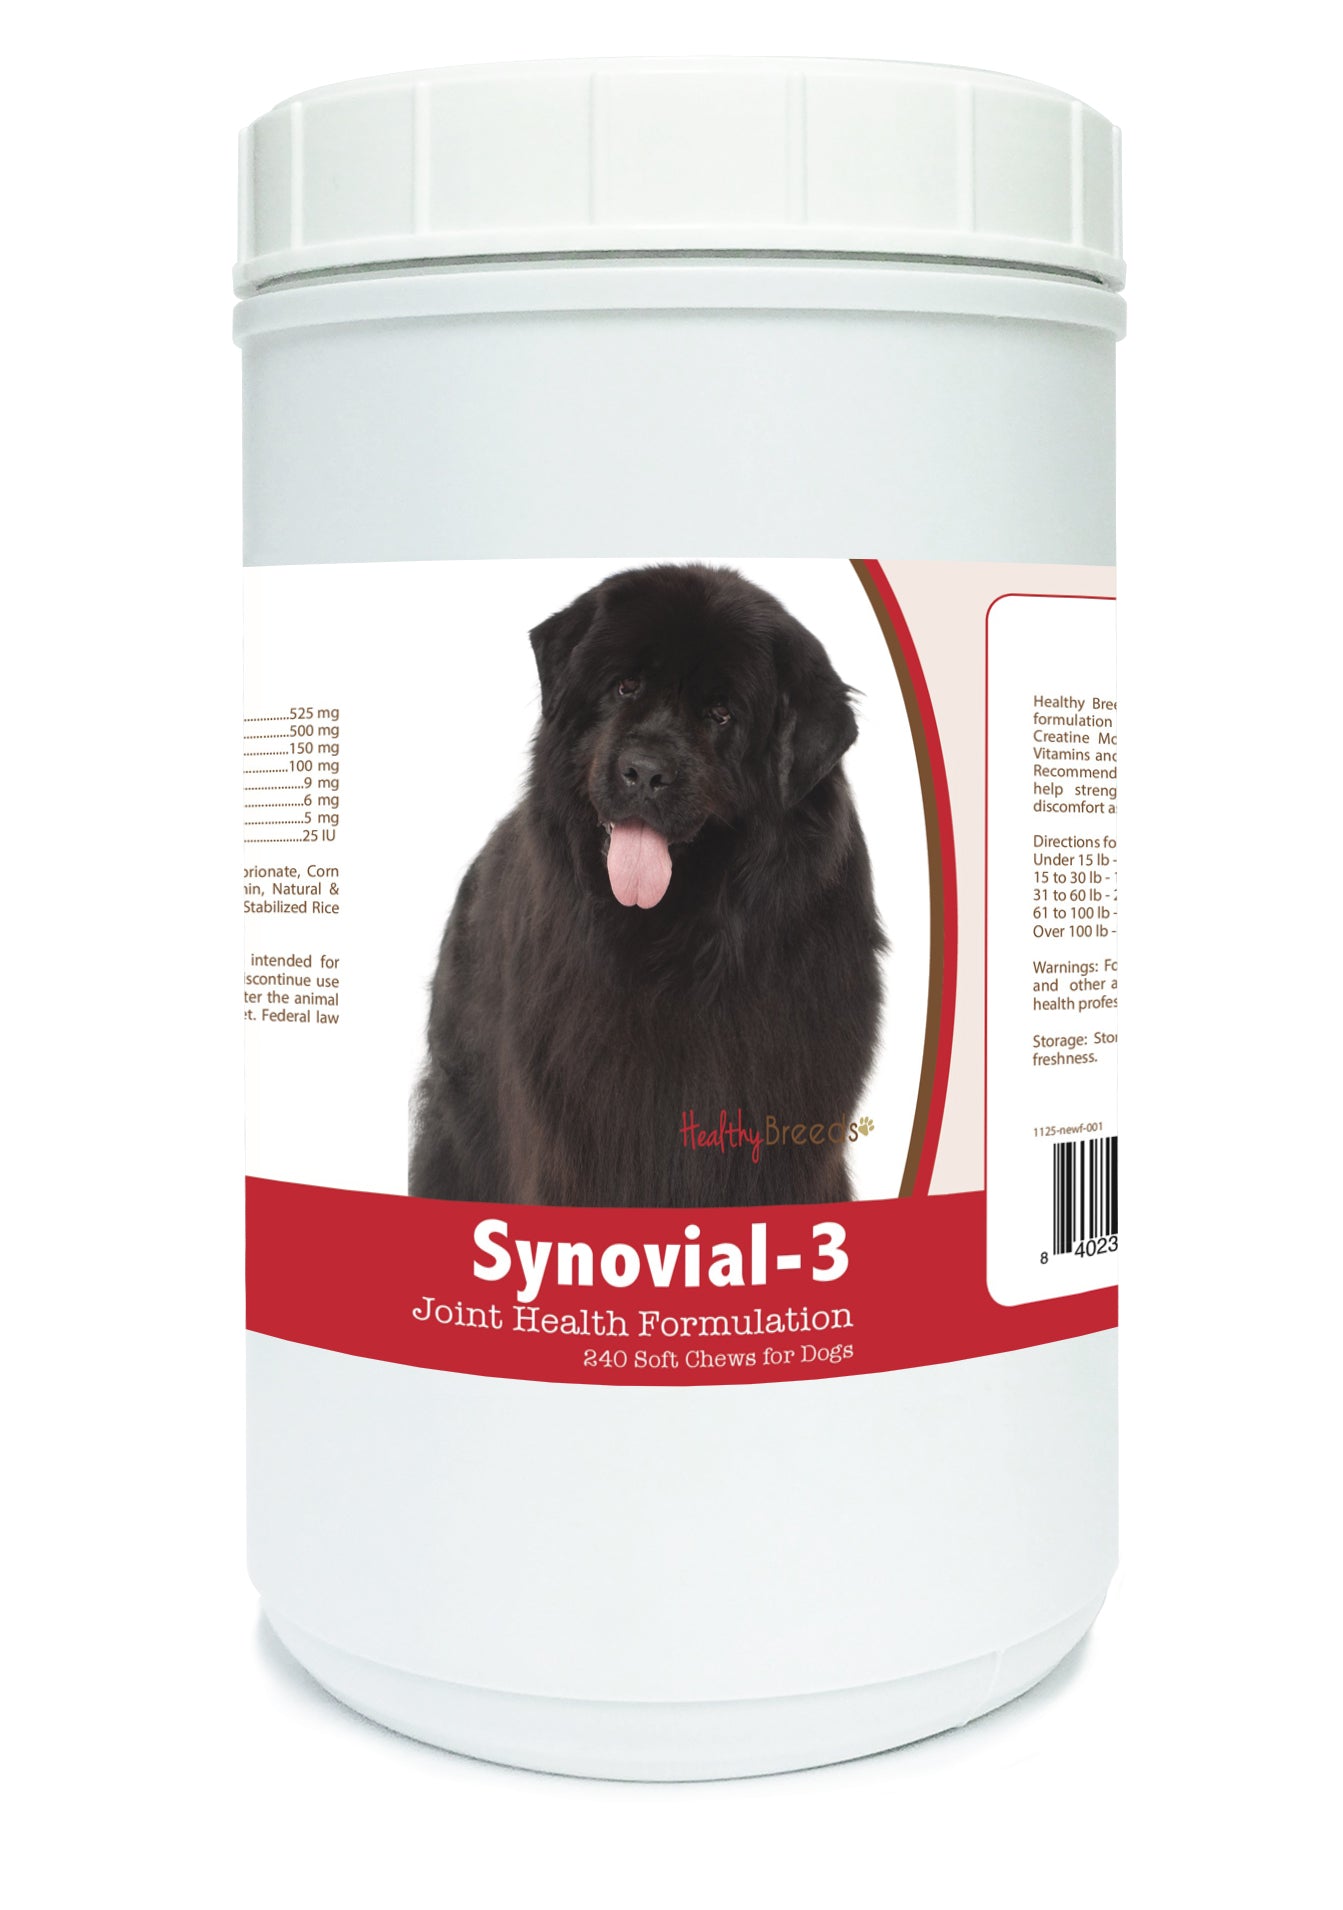 Newfoundland Synovial-3 Joint Health Formulation Soft Chews 240 Count